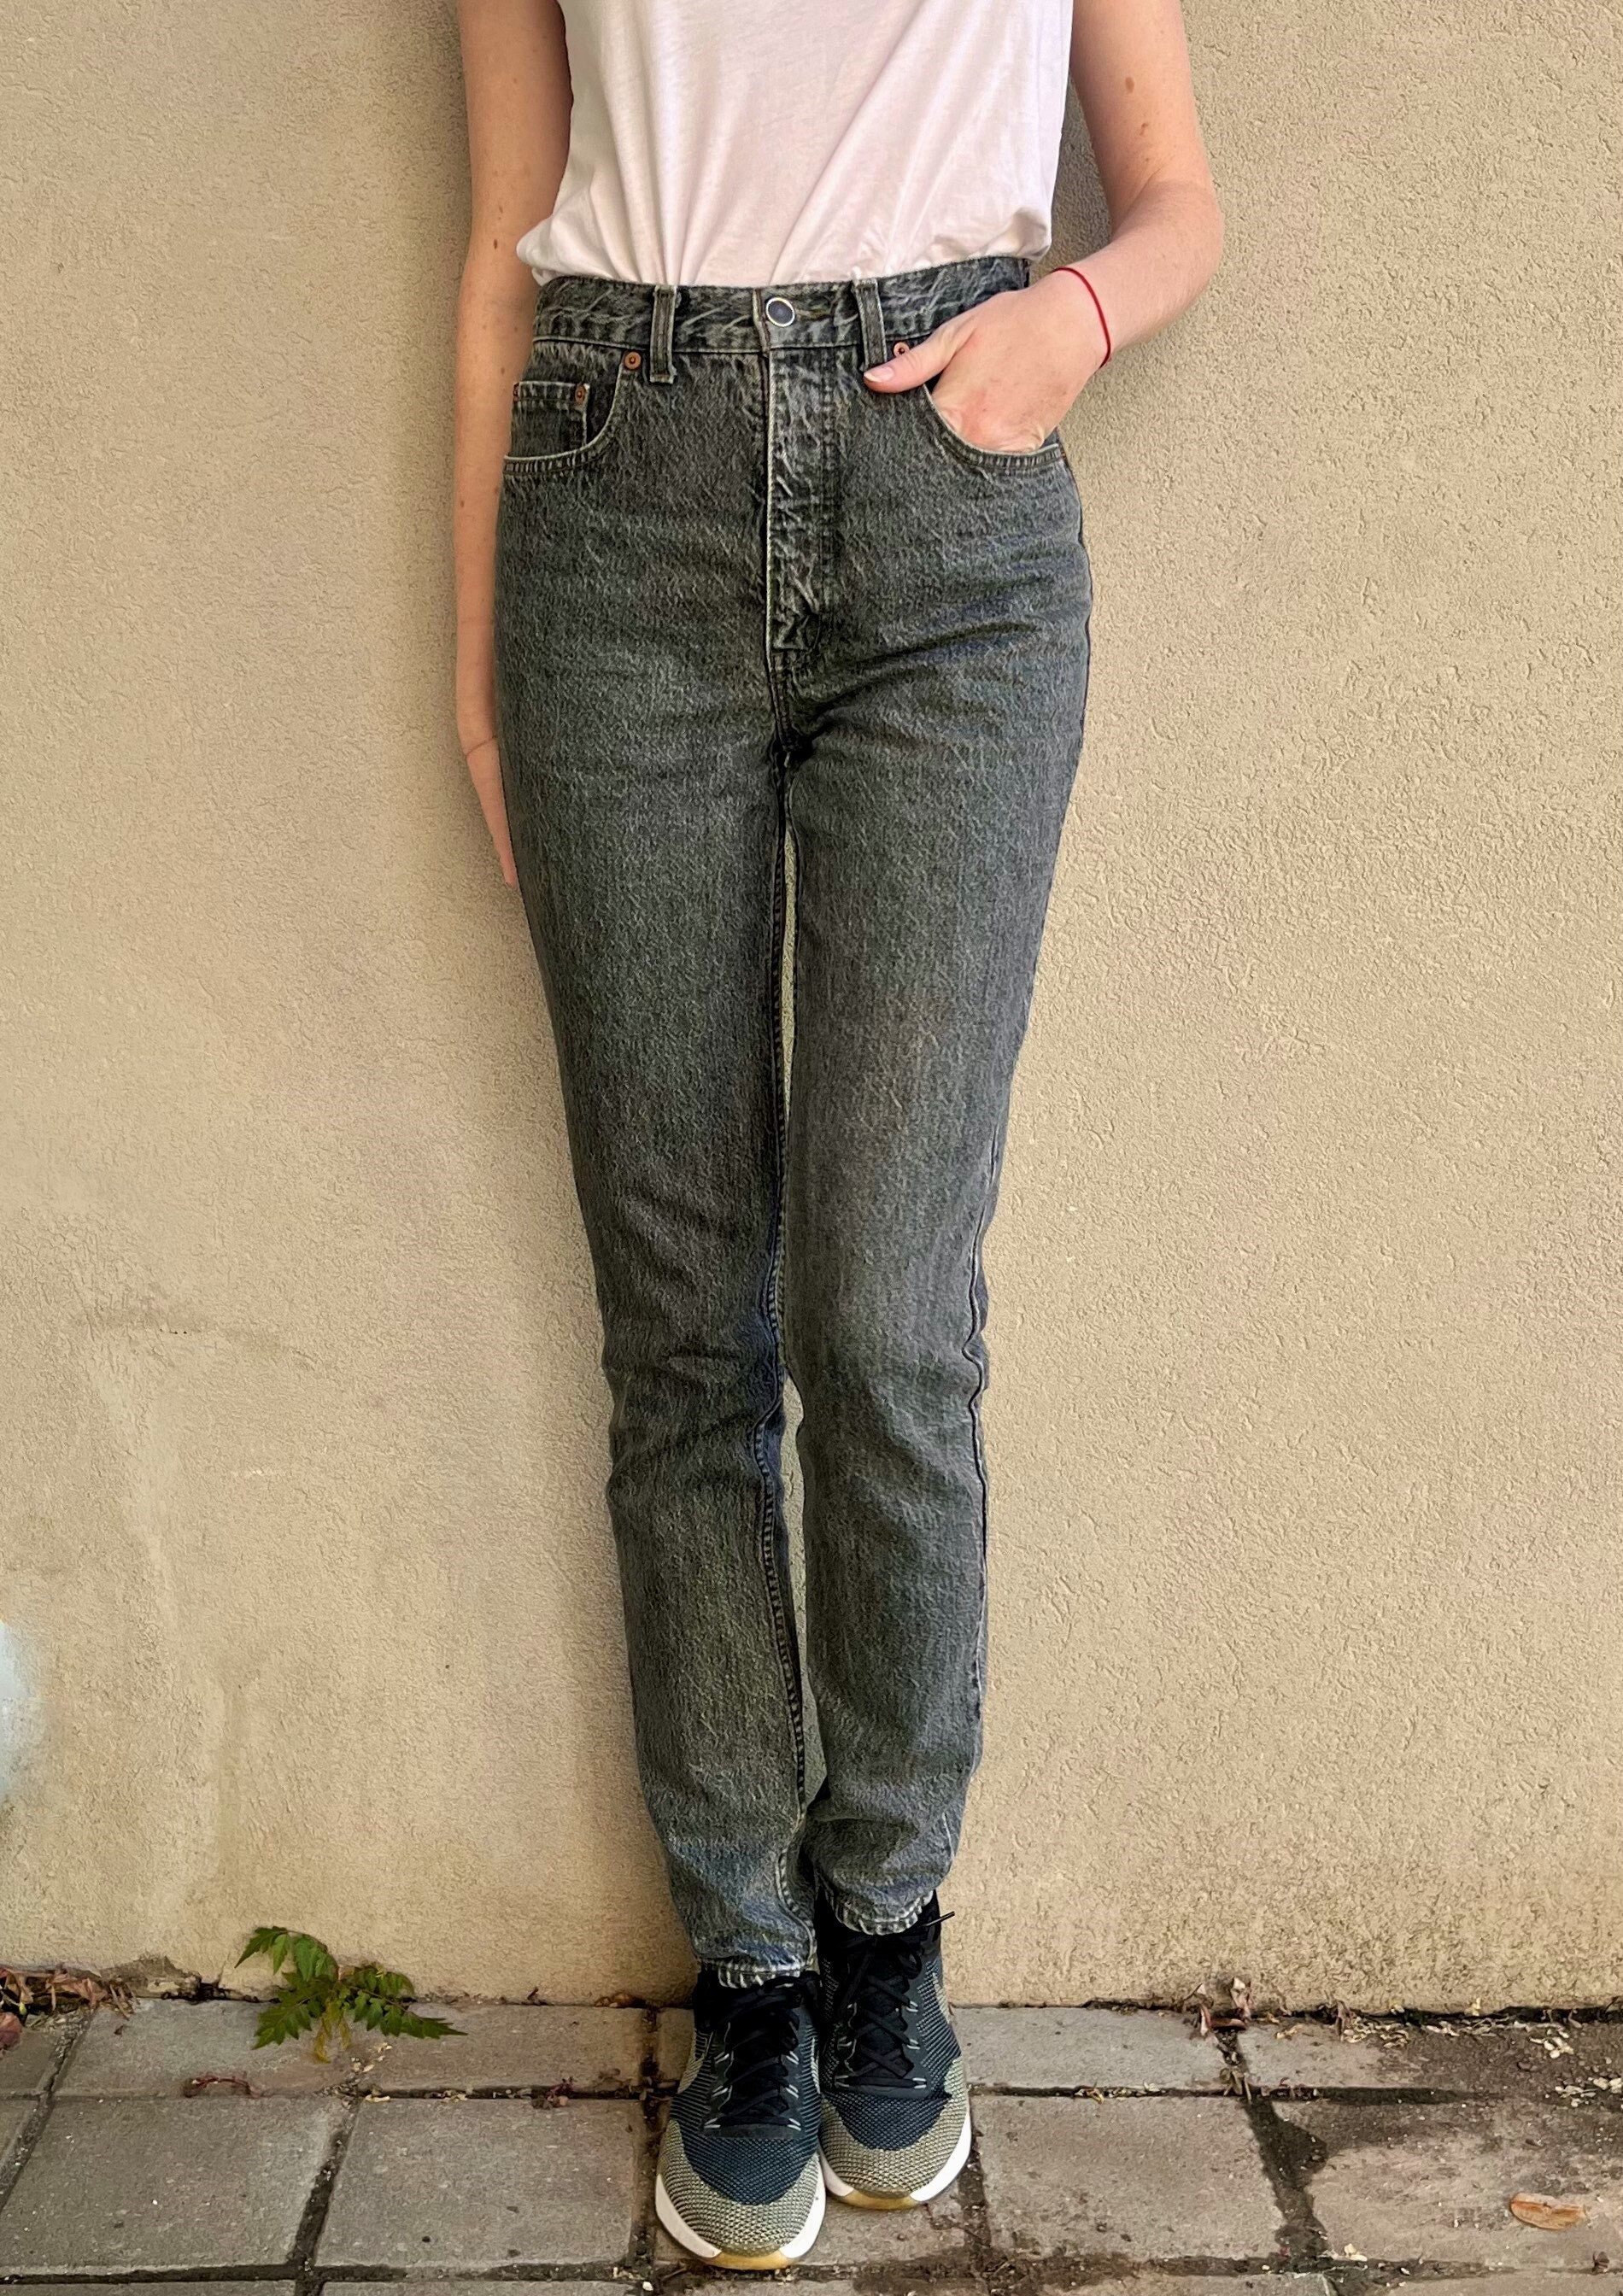 90s Levis Black Acid Wash High Wasted Jeans/ Levis Jeans Silver Tab 737/  Straight leg Size 29/33